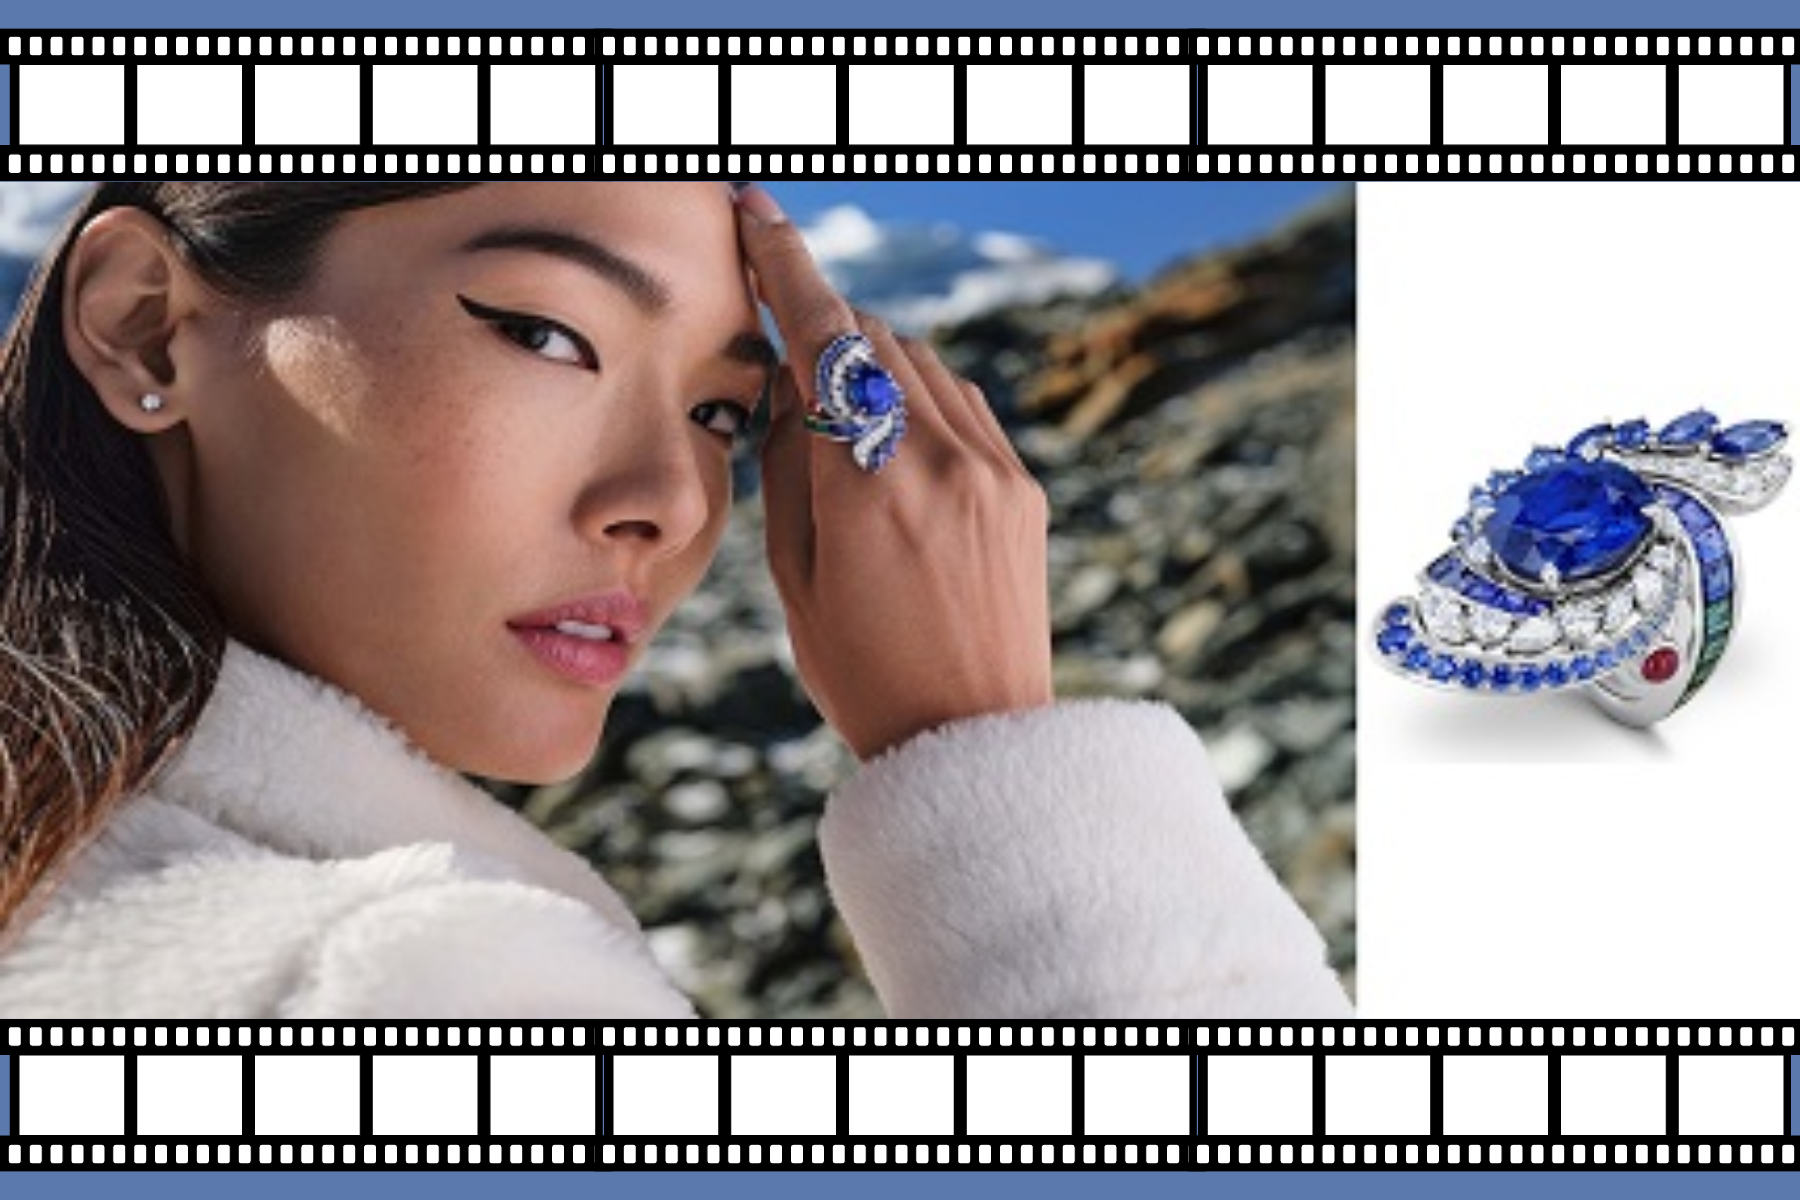 The Jewel Of Gübelin Jewellery Is Inspired By The Indian Ocean